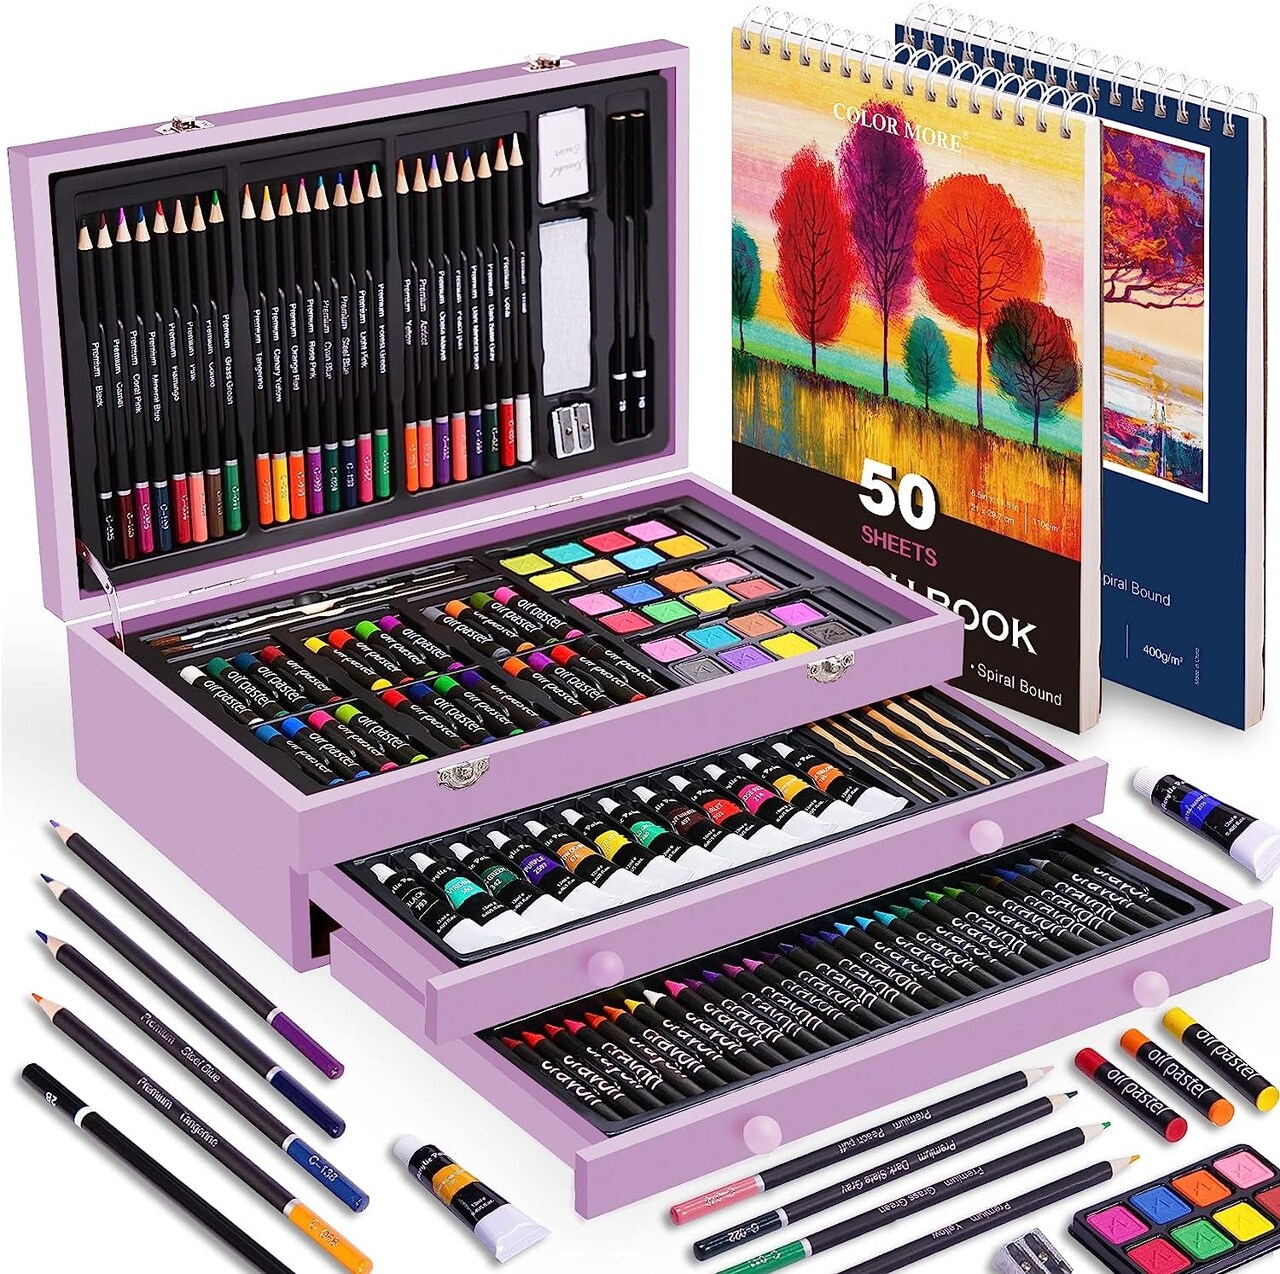 175 Piece Deluxe Art Set with 2 Drawing Pads, Acrylic  Paints,Crayons,Colored Pencils,Paint Set in Wooden Case,Professional Art Kit ,Art Supplies for Adults,Teens and Artist,Paint Supplies